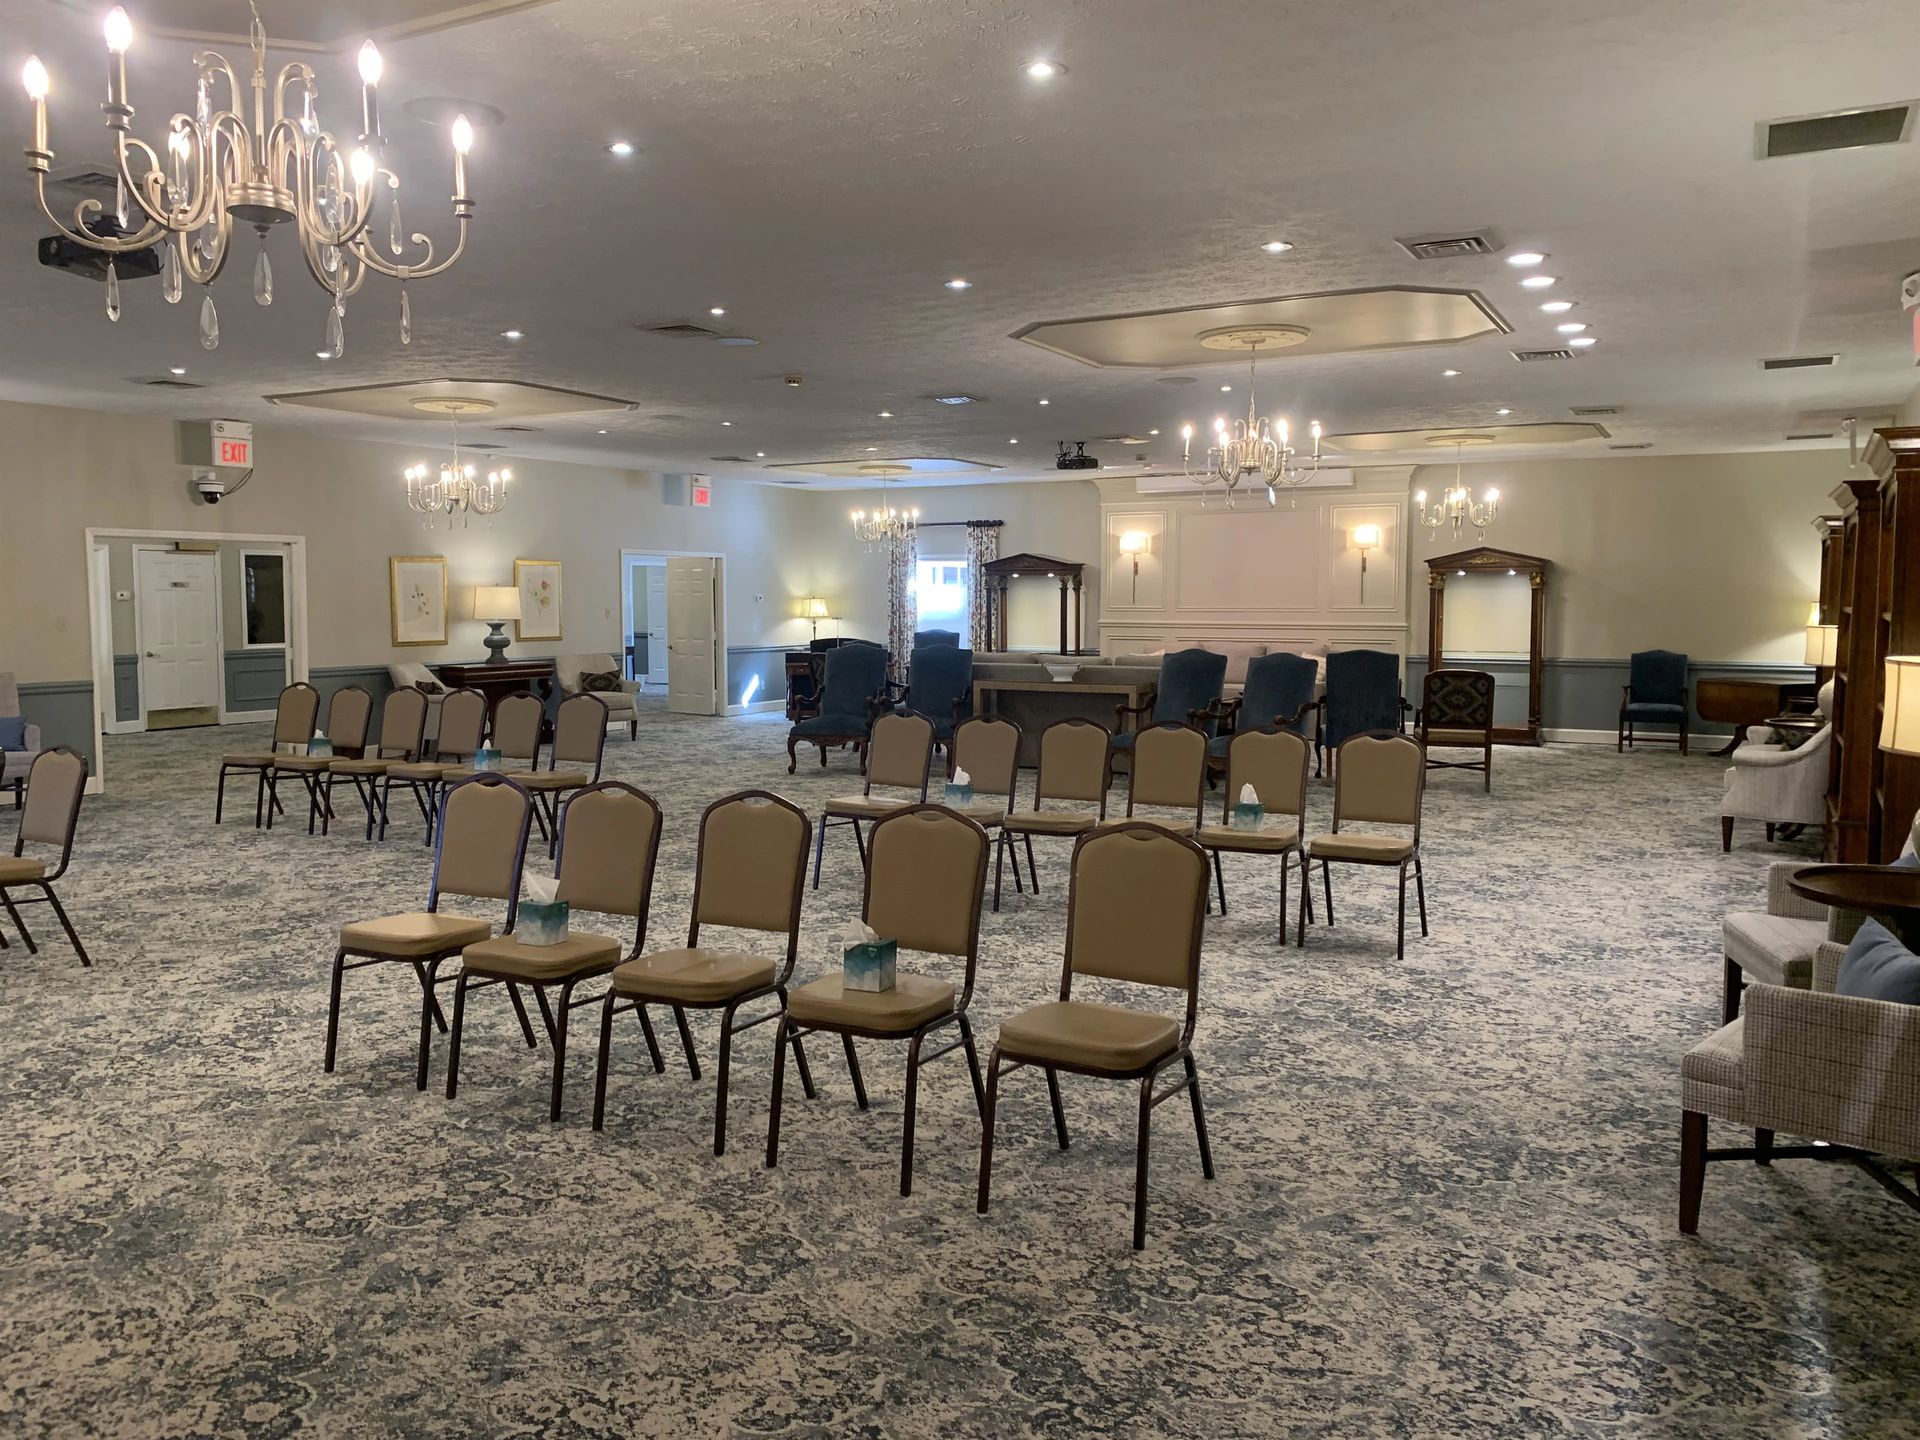 a large room filled with chairs and a chandelier .